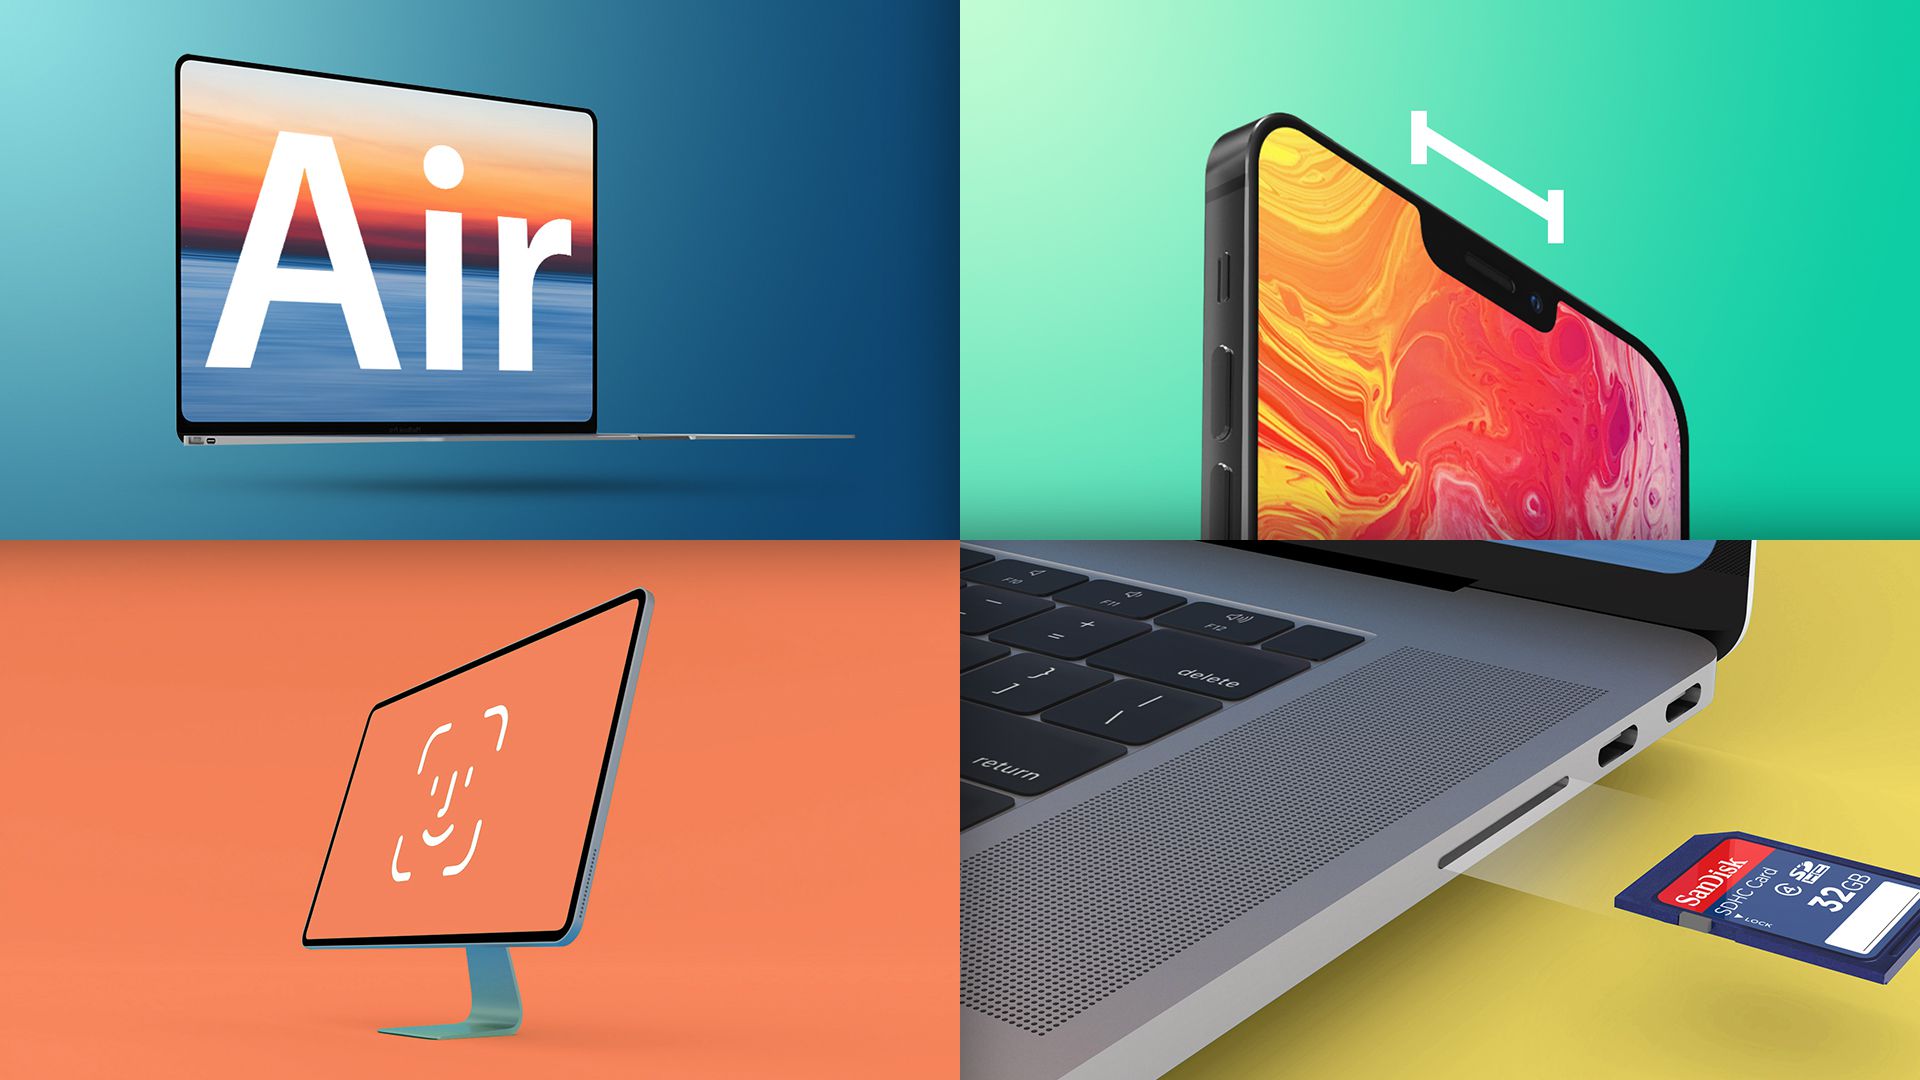 Key news: MacBook Air “thinner and lighter”, iPhone 13 smaller Notch, iOS 14.4 coming soon